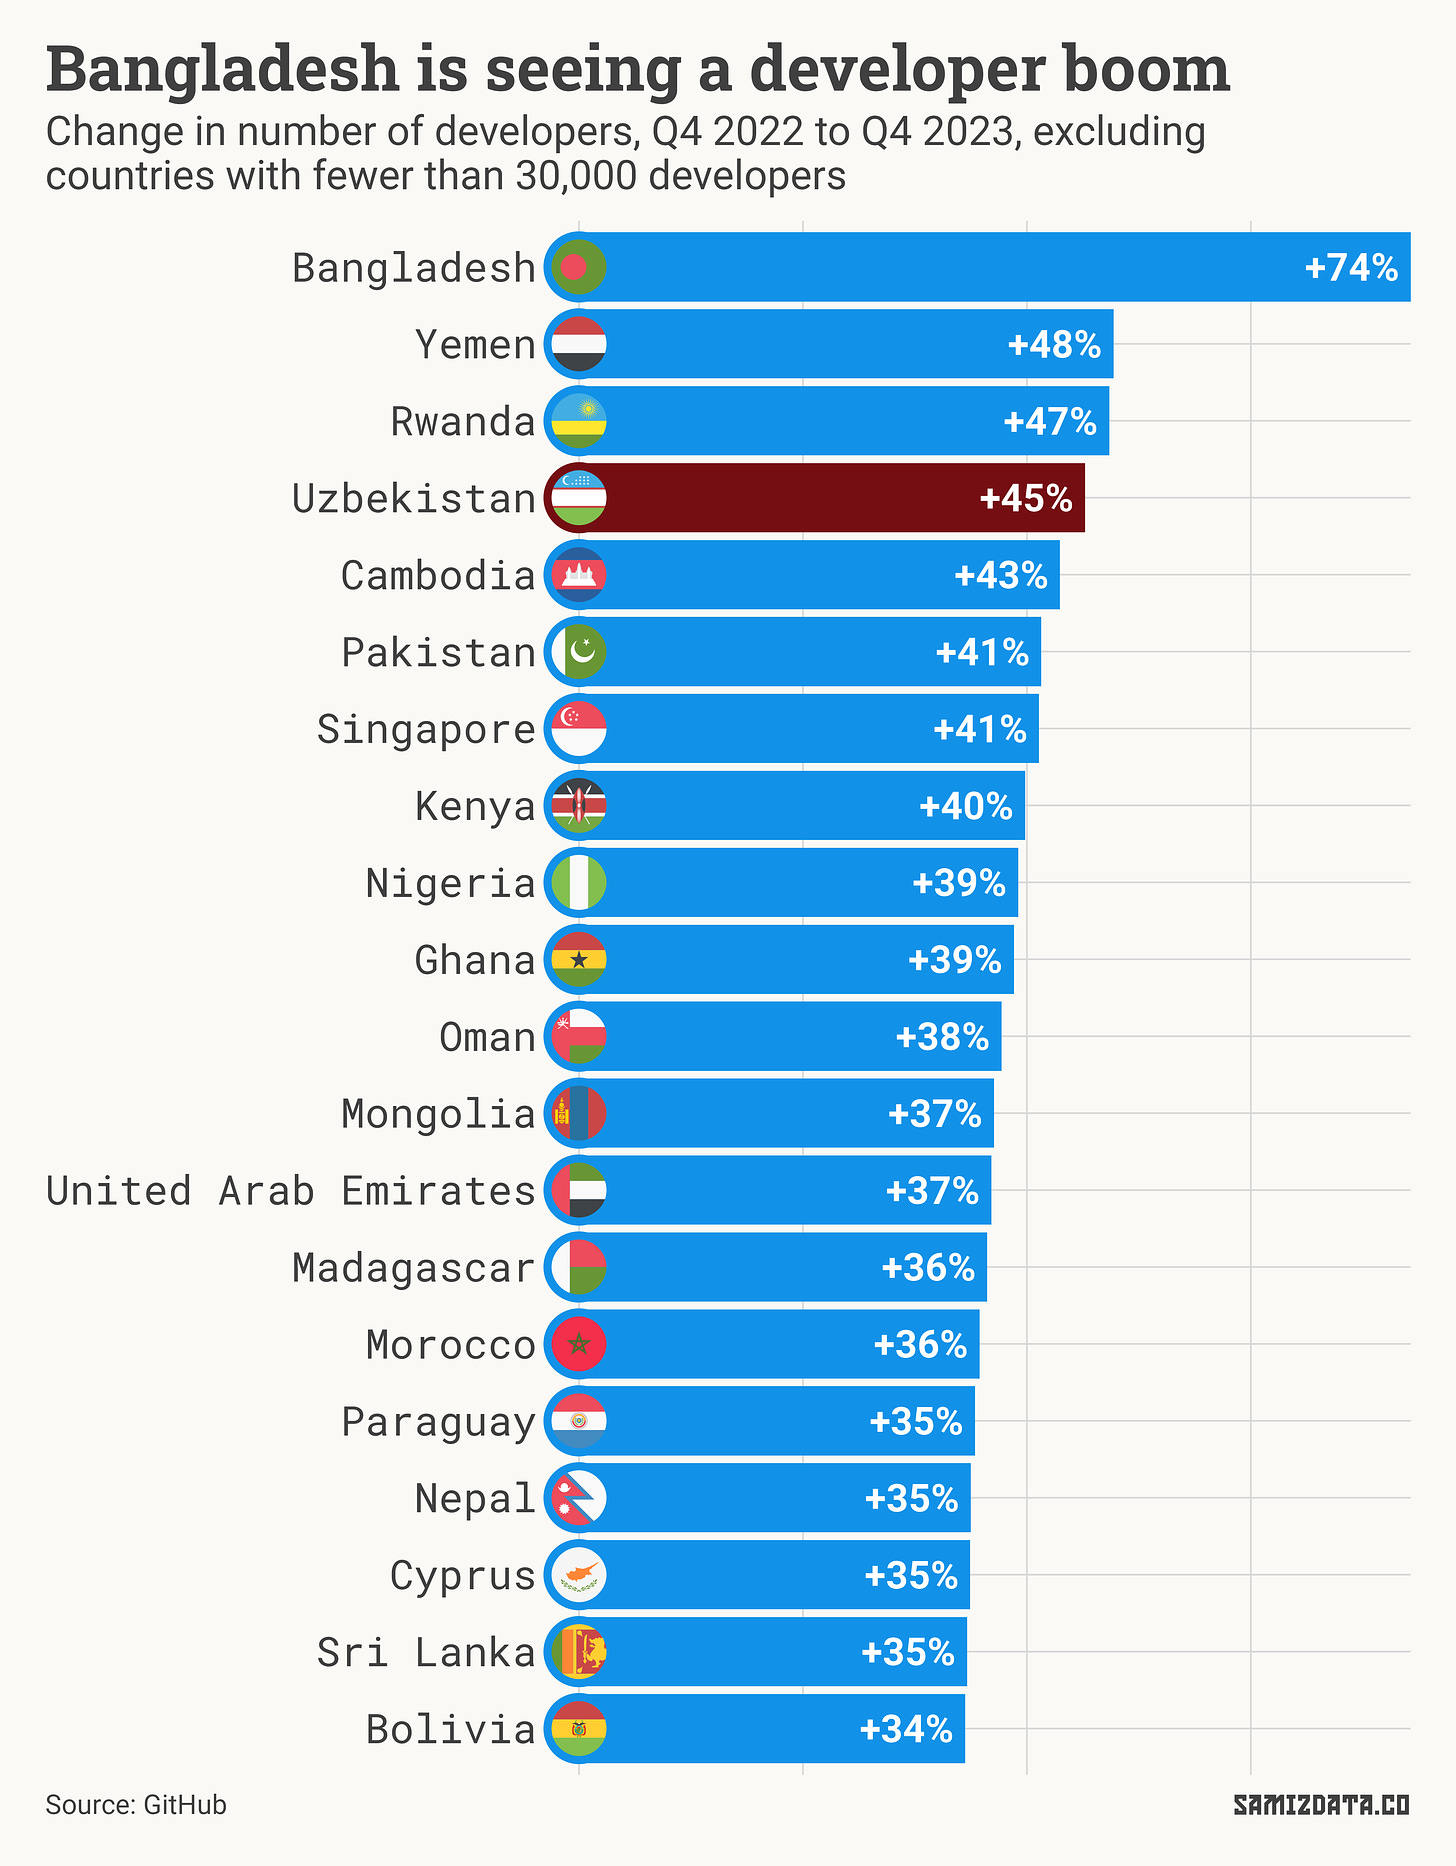 Bar chart showing the change in the number of developers on GitHub from Q4 2022 to Q4 2023. Bangladesh has seen a 74% in the number of developers. Yemen, Rwanda and Uzbekistan are behind.